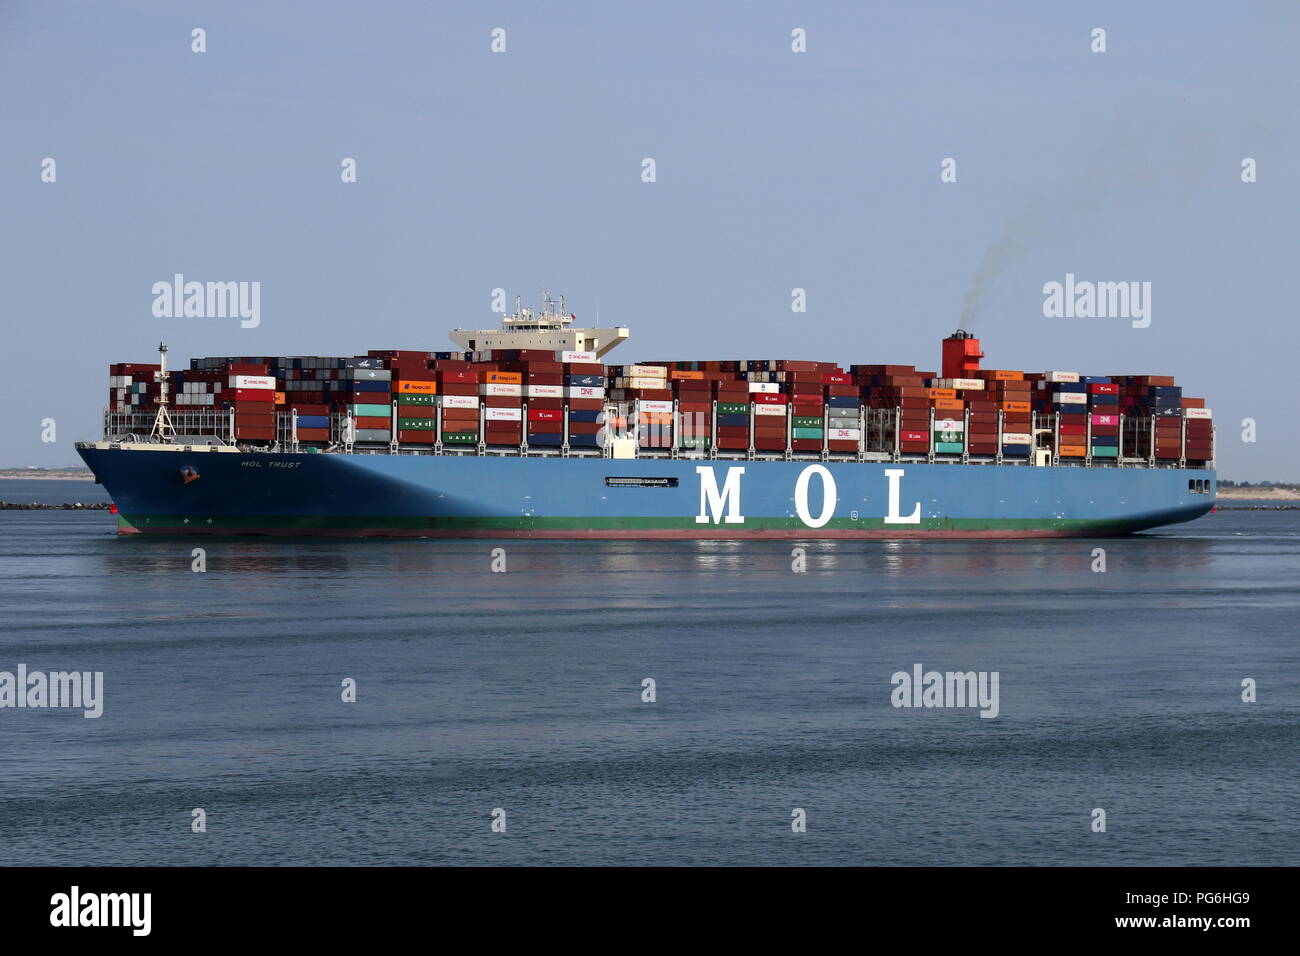 The container ship MOL leaves the port Rotterdam on 27 July 2018 Stock Photo - Alamy